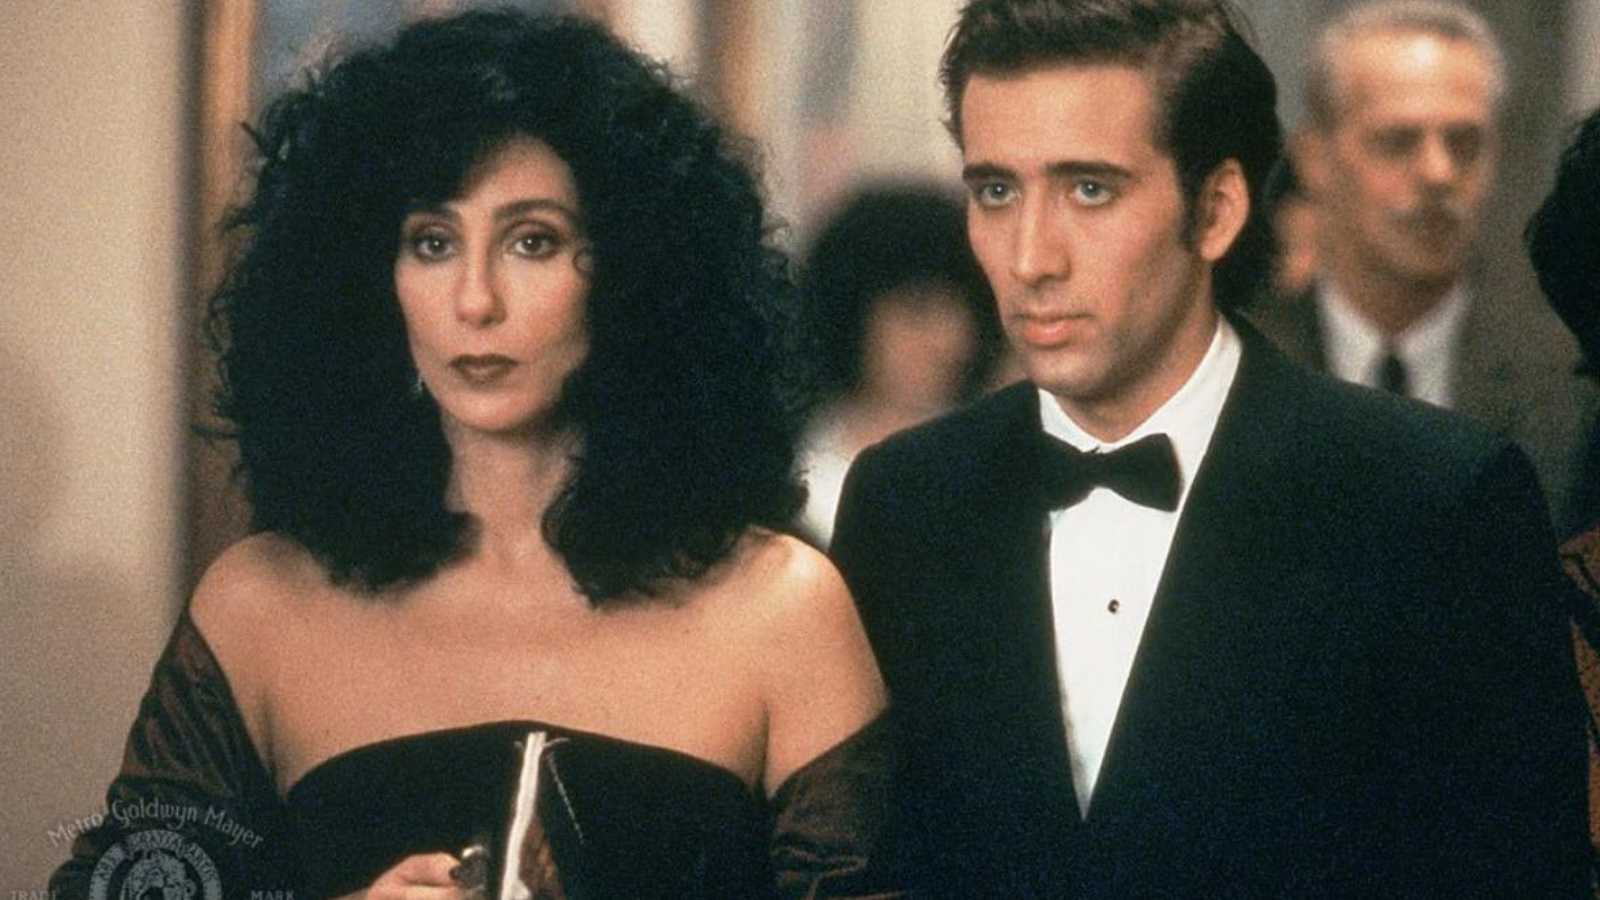 Nicolas Cage and Cher in Moonstruck (1987)